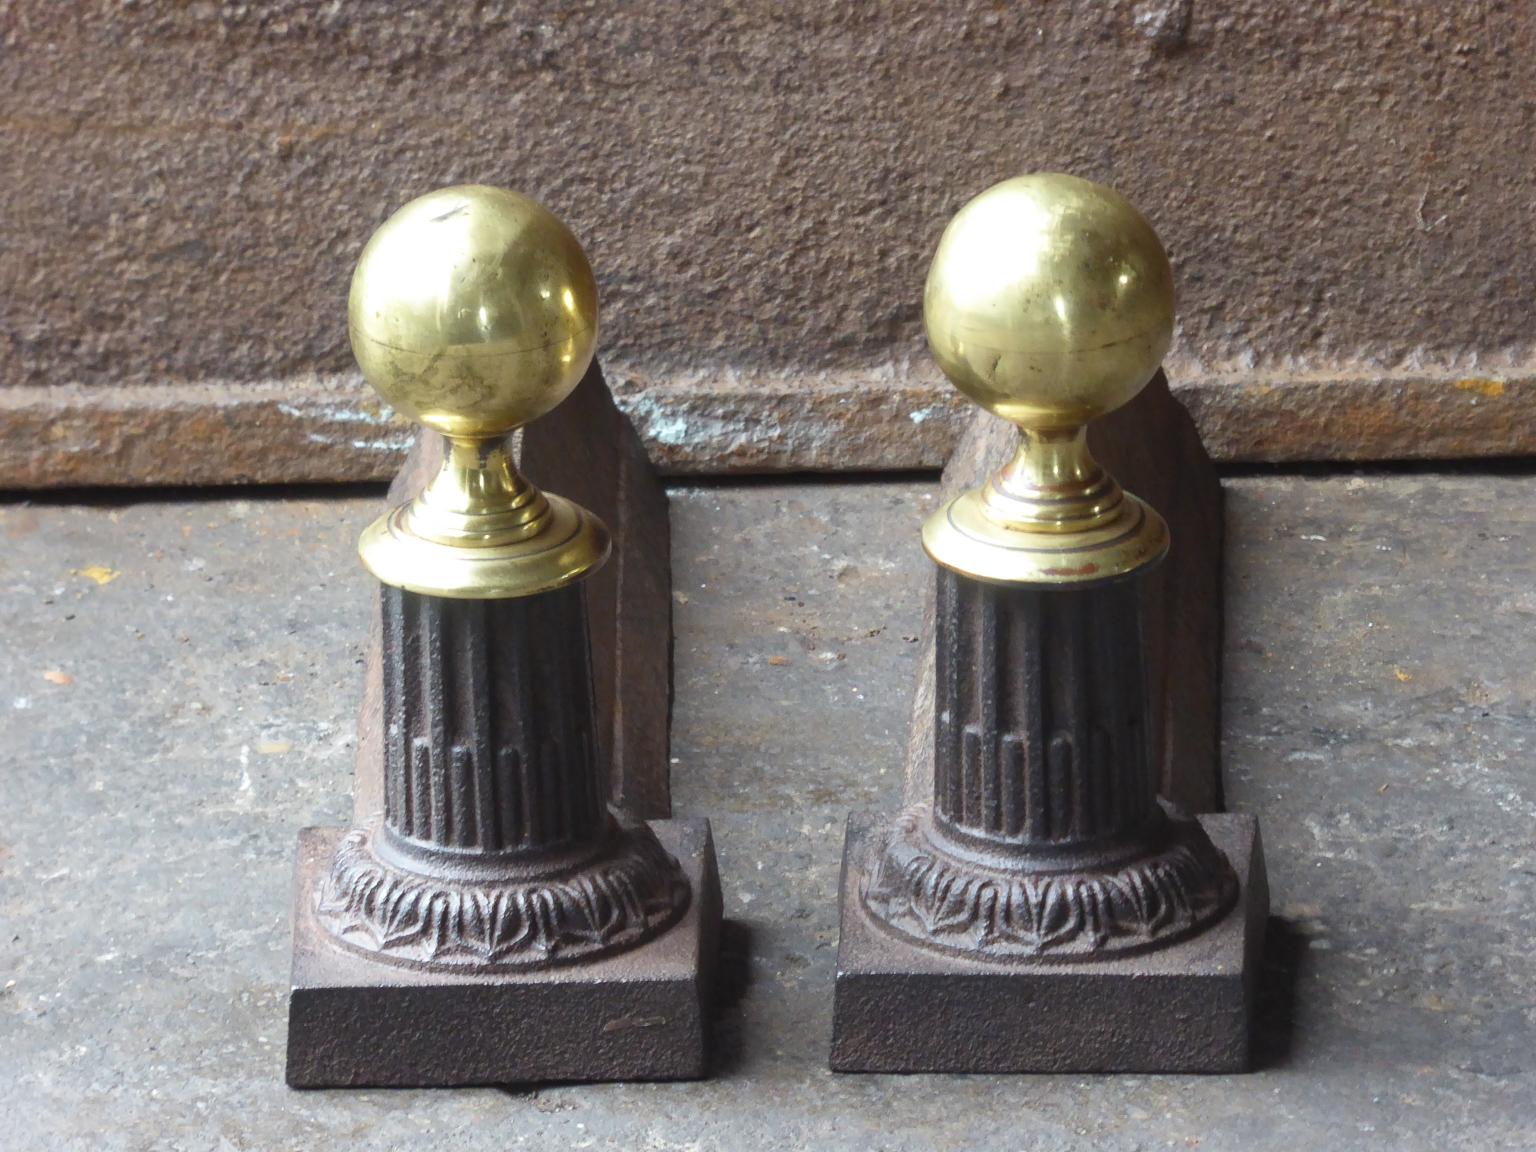 19th-20th century French Neoclassical style andirons made of brass and cast iron.